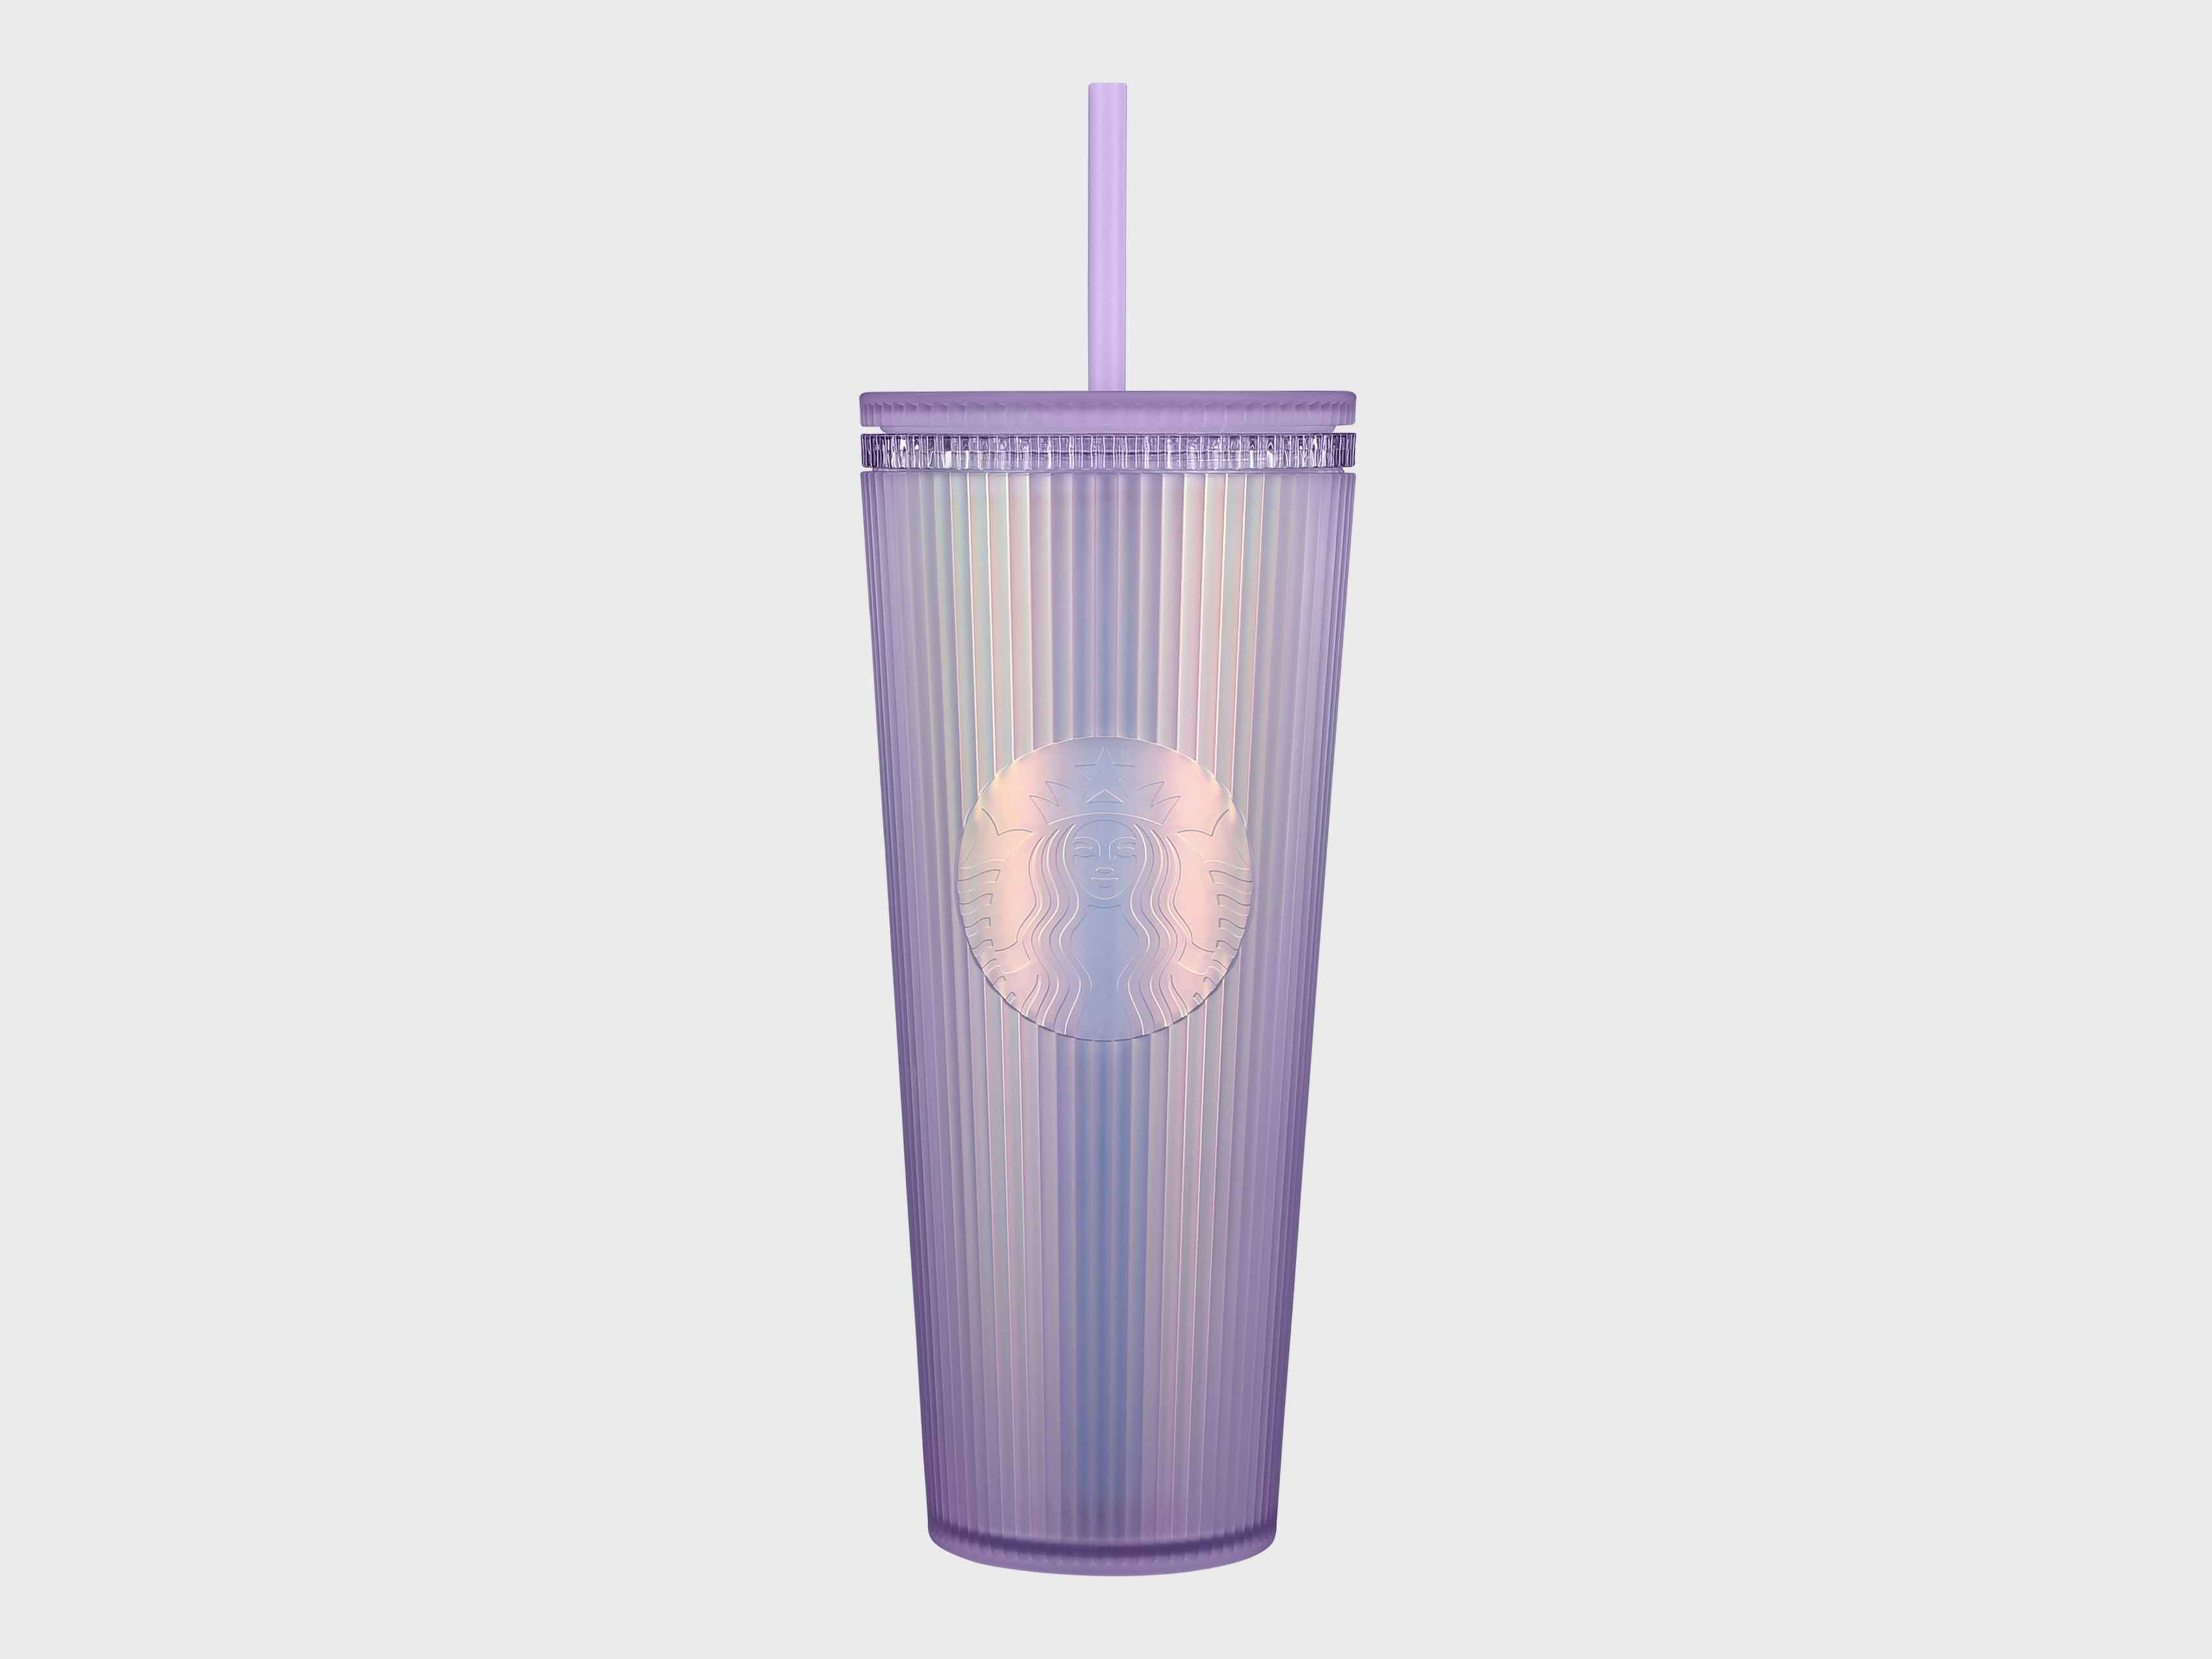 https://prod-cdn-thekrazycouponlady.imgix.net/wp-content/uploads/2022/09/starbucks-purple-pleated-cold-cup-1695848355-1695848355.jpg?auto=format&fit=fill&q=25